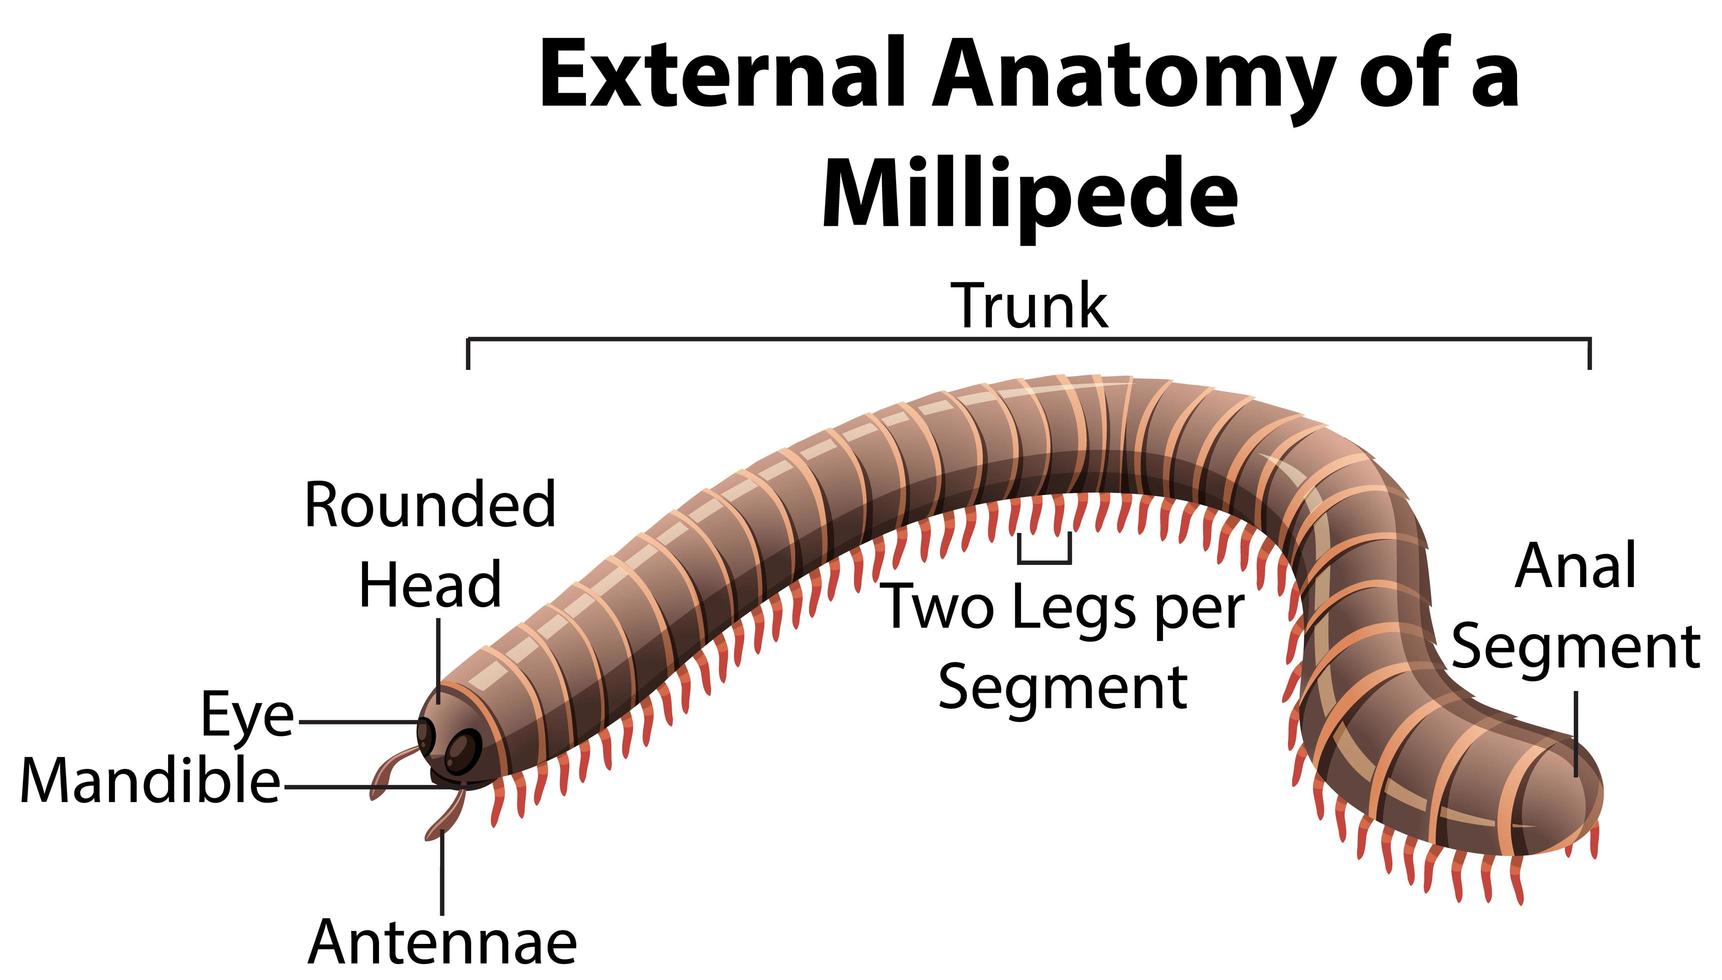 External Anatomy of a Millipede on white background vector